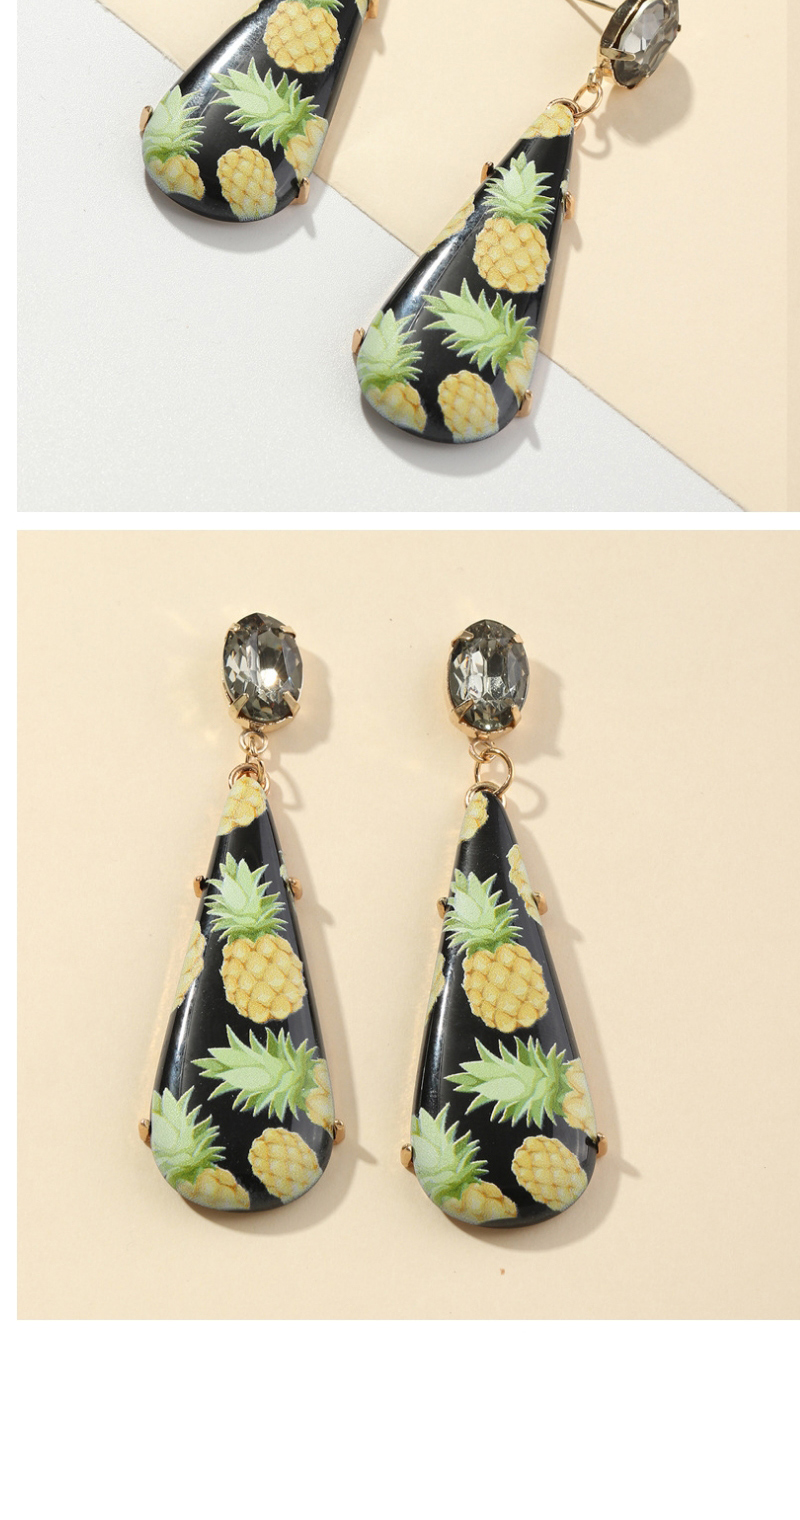 Fashion Red Resin-printed Drop-shaped Pineapple And Crystal Earrings,Drop Earrings